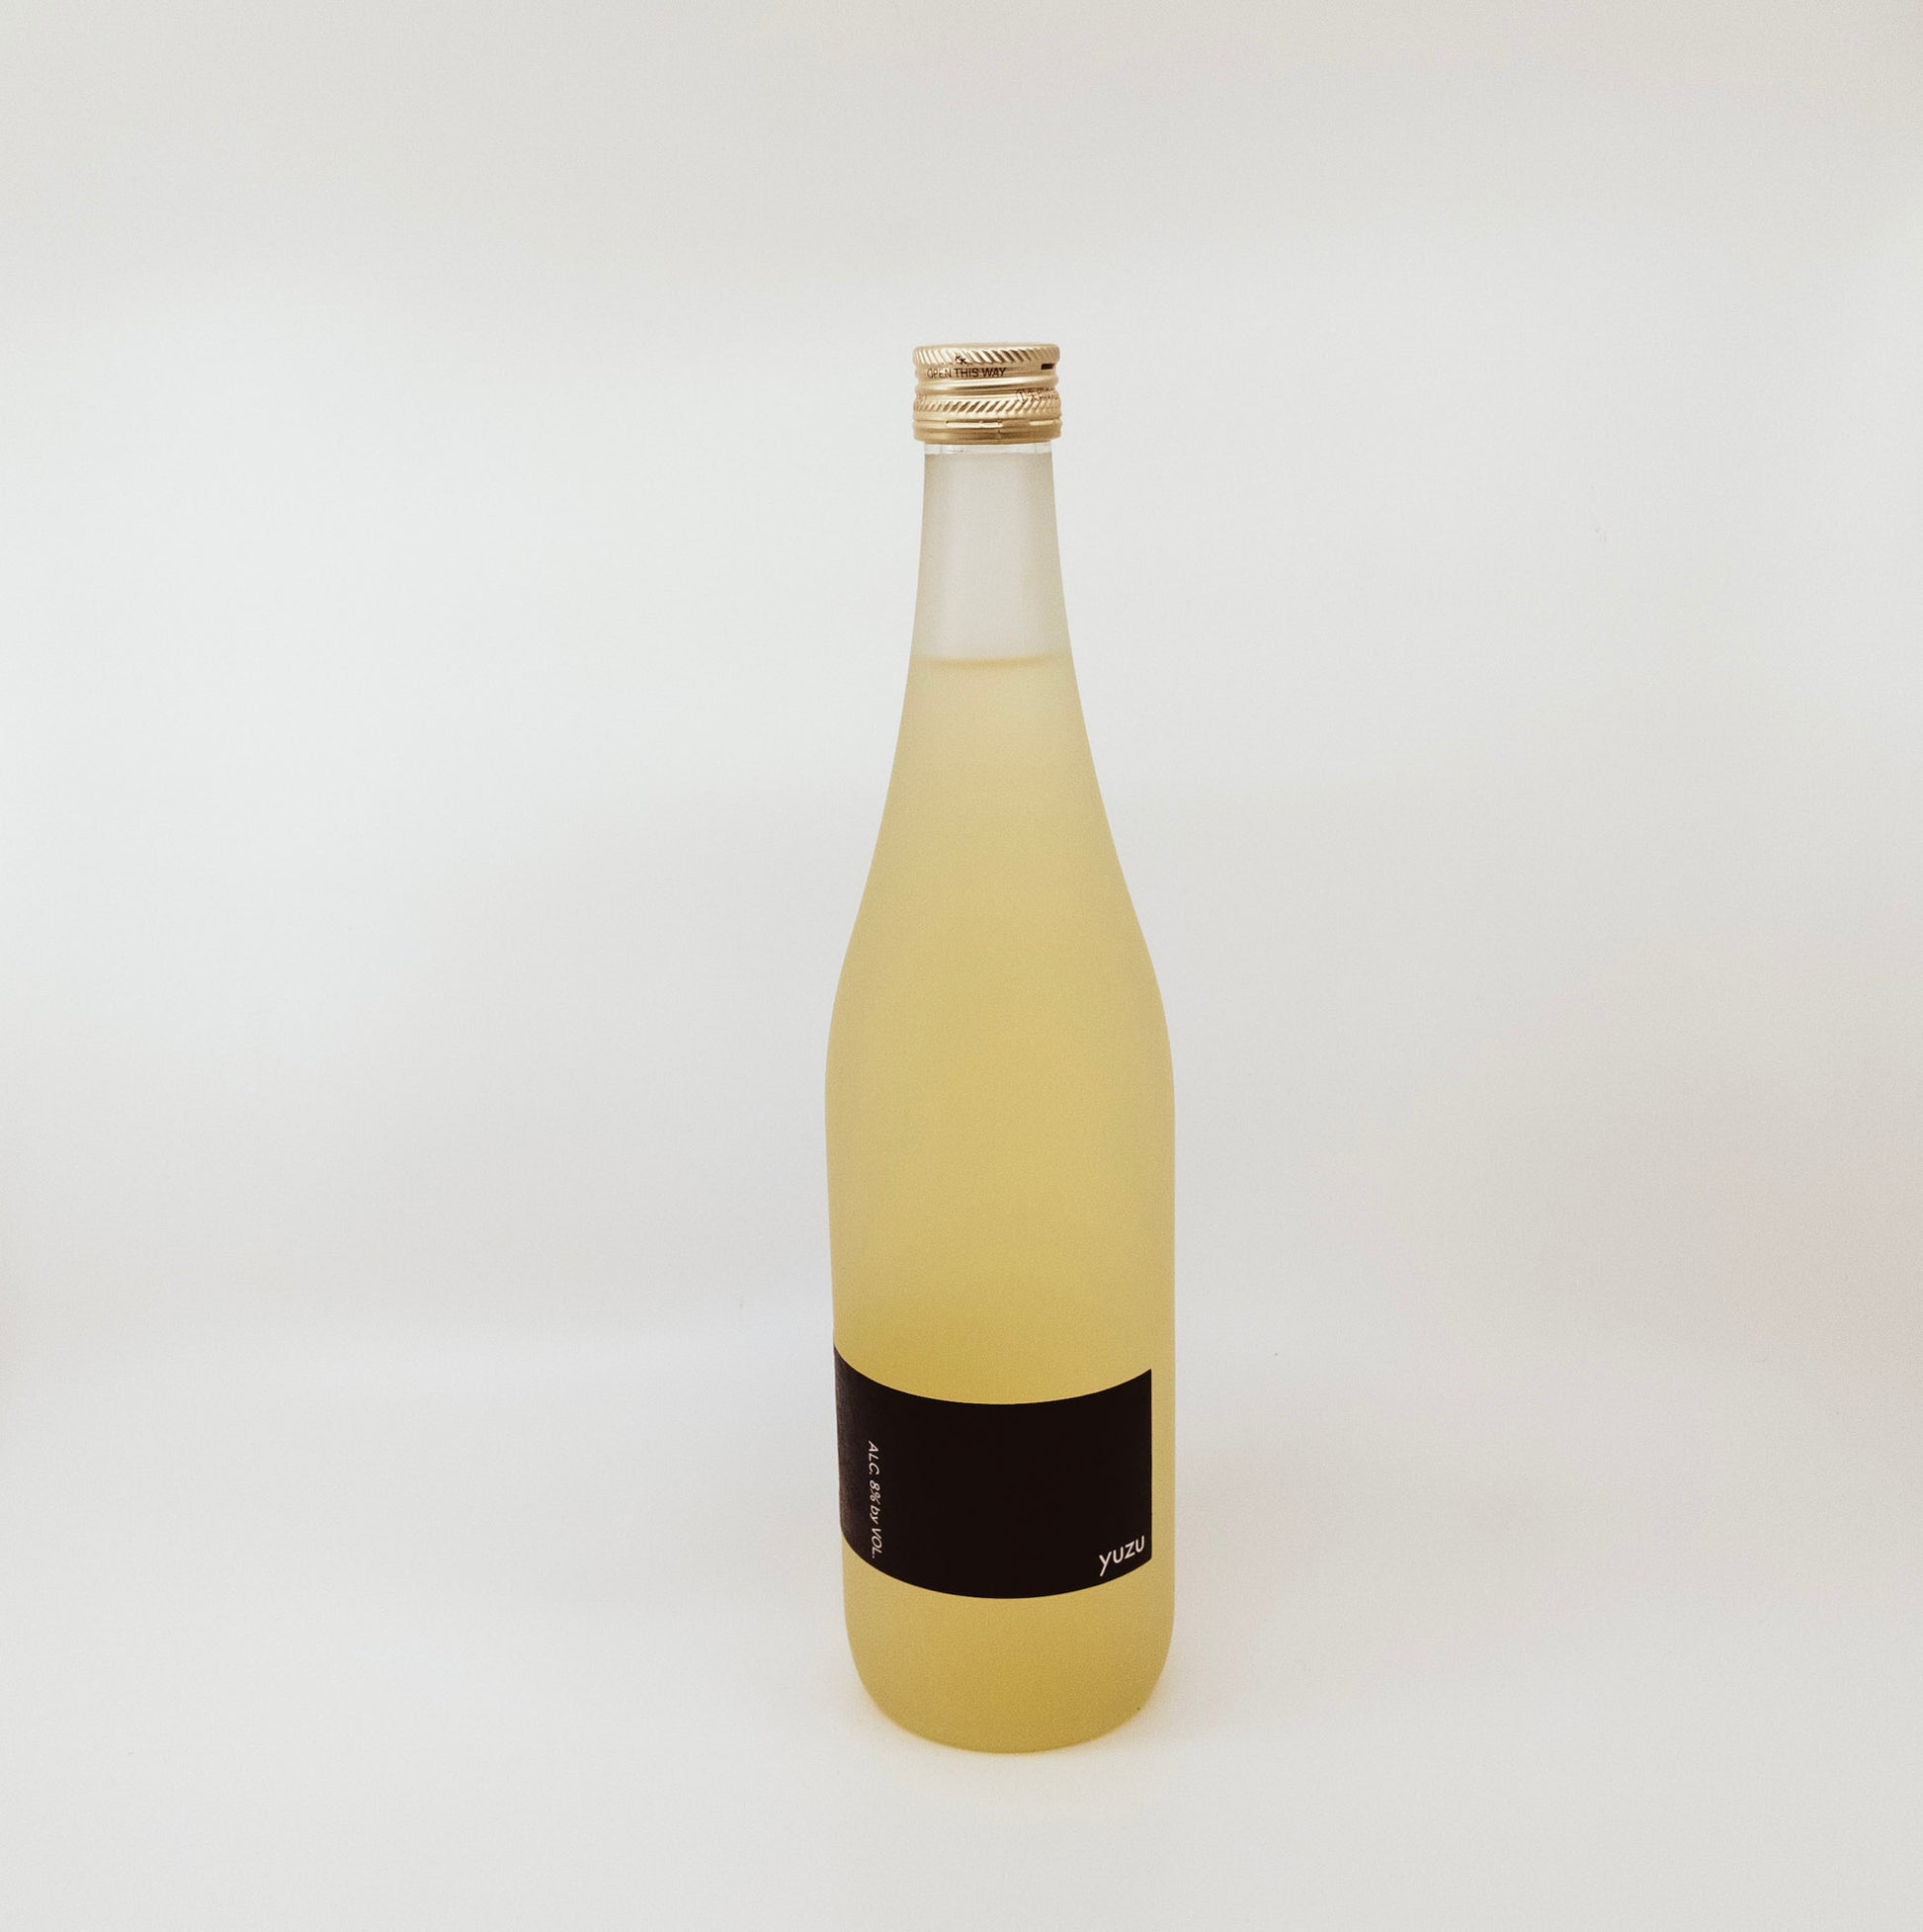 cream colored bottle with black label